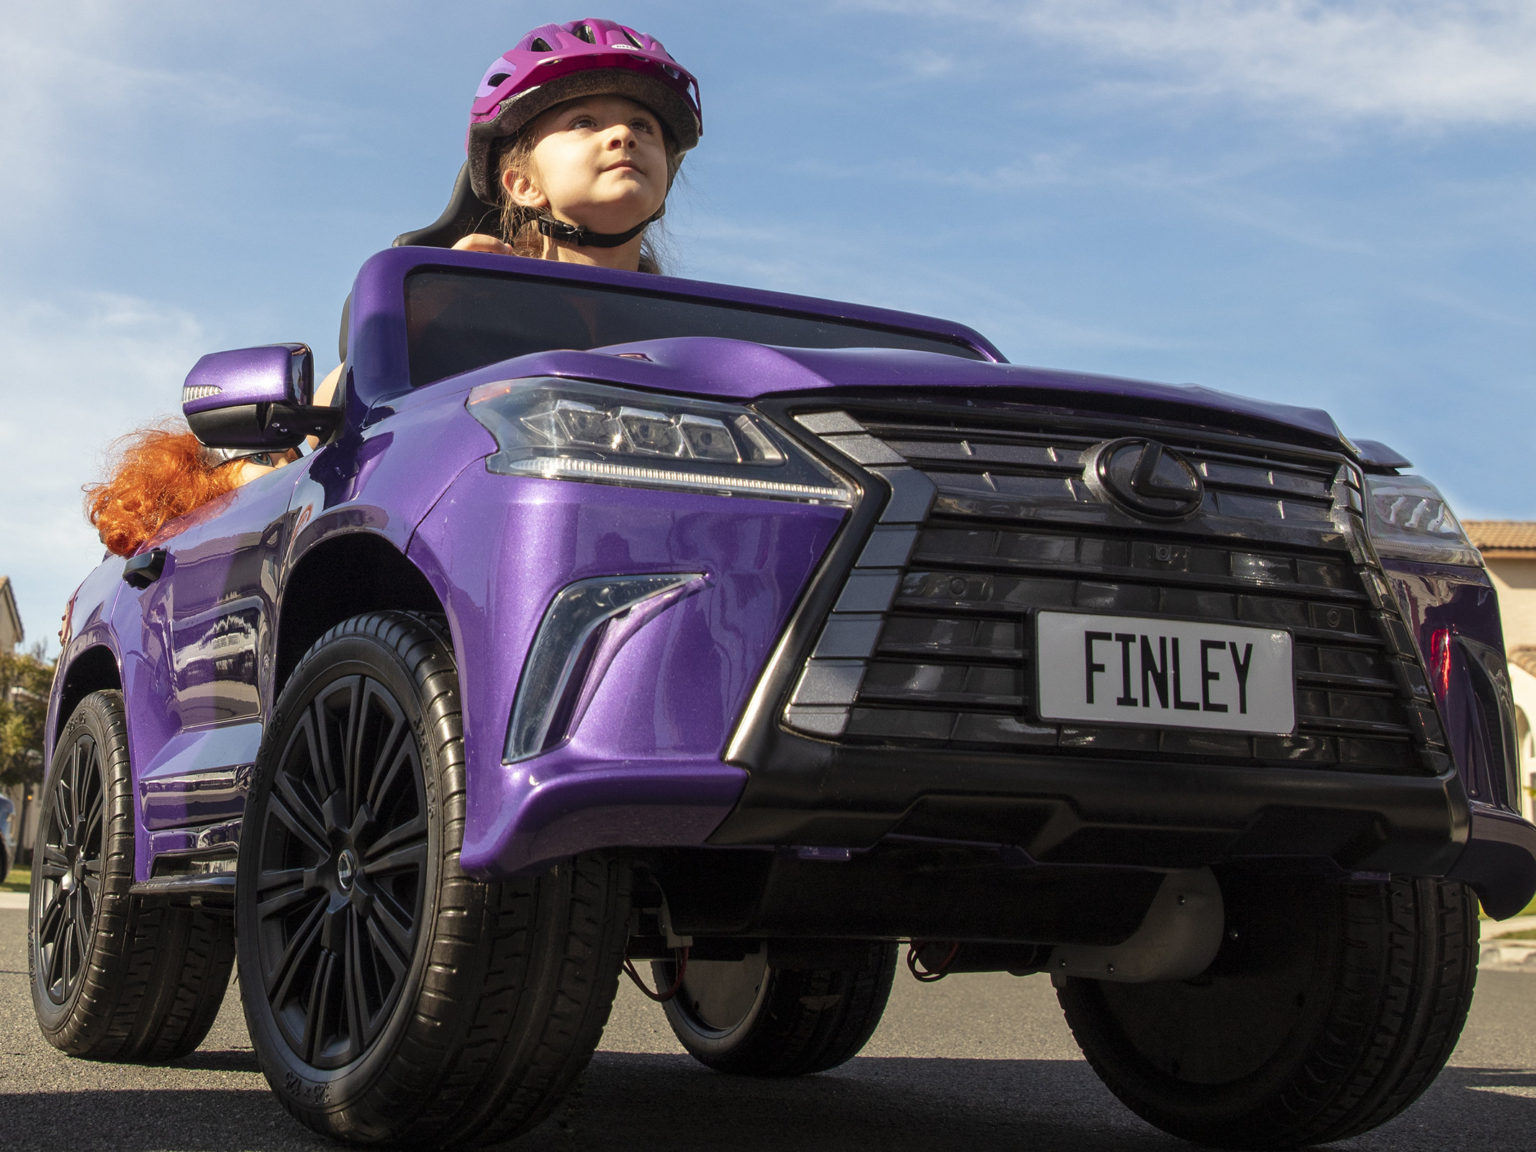 Dreams do come true for one child, who received a fancy new Lexus play car.